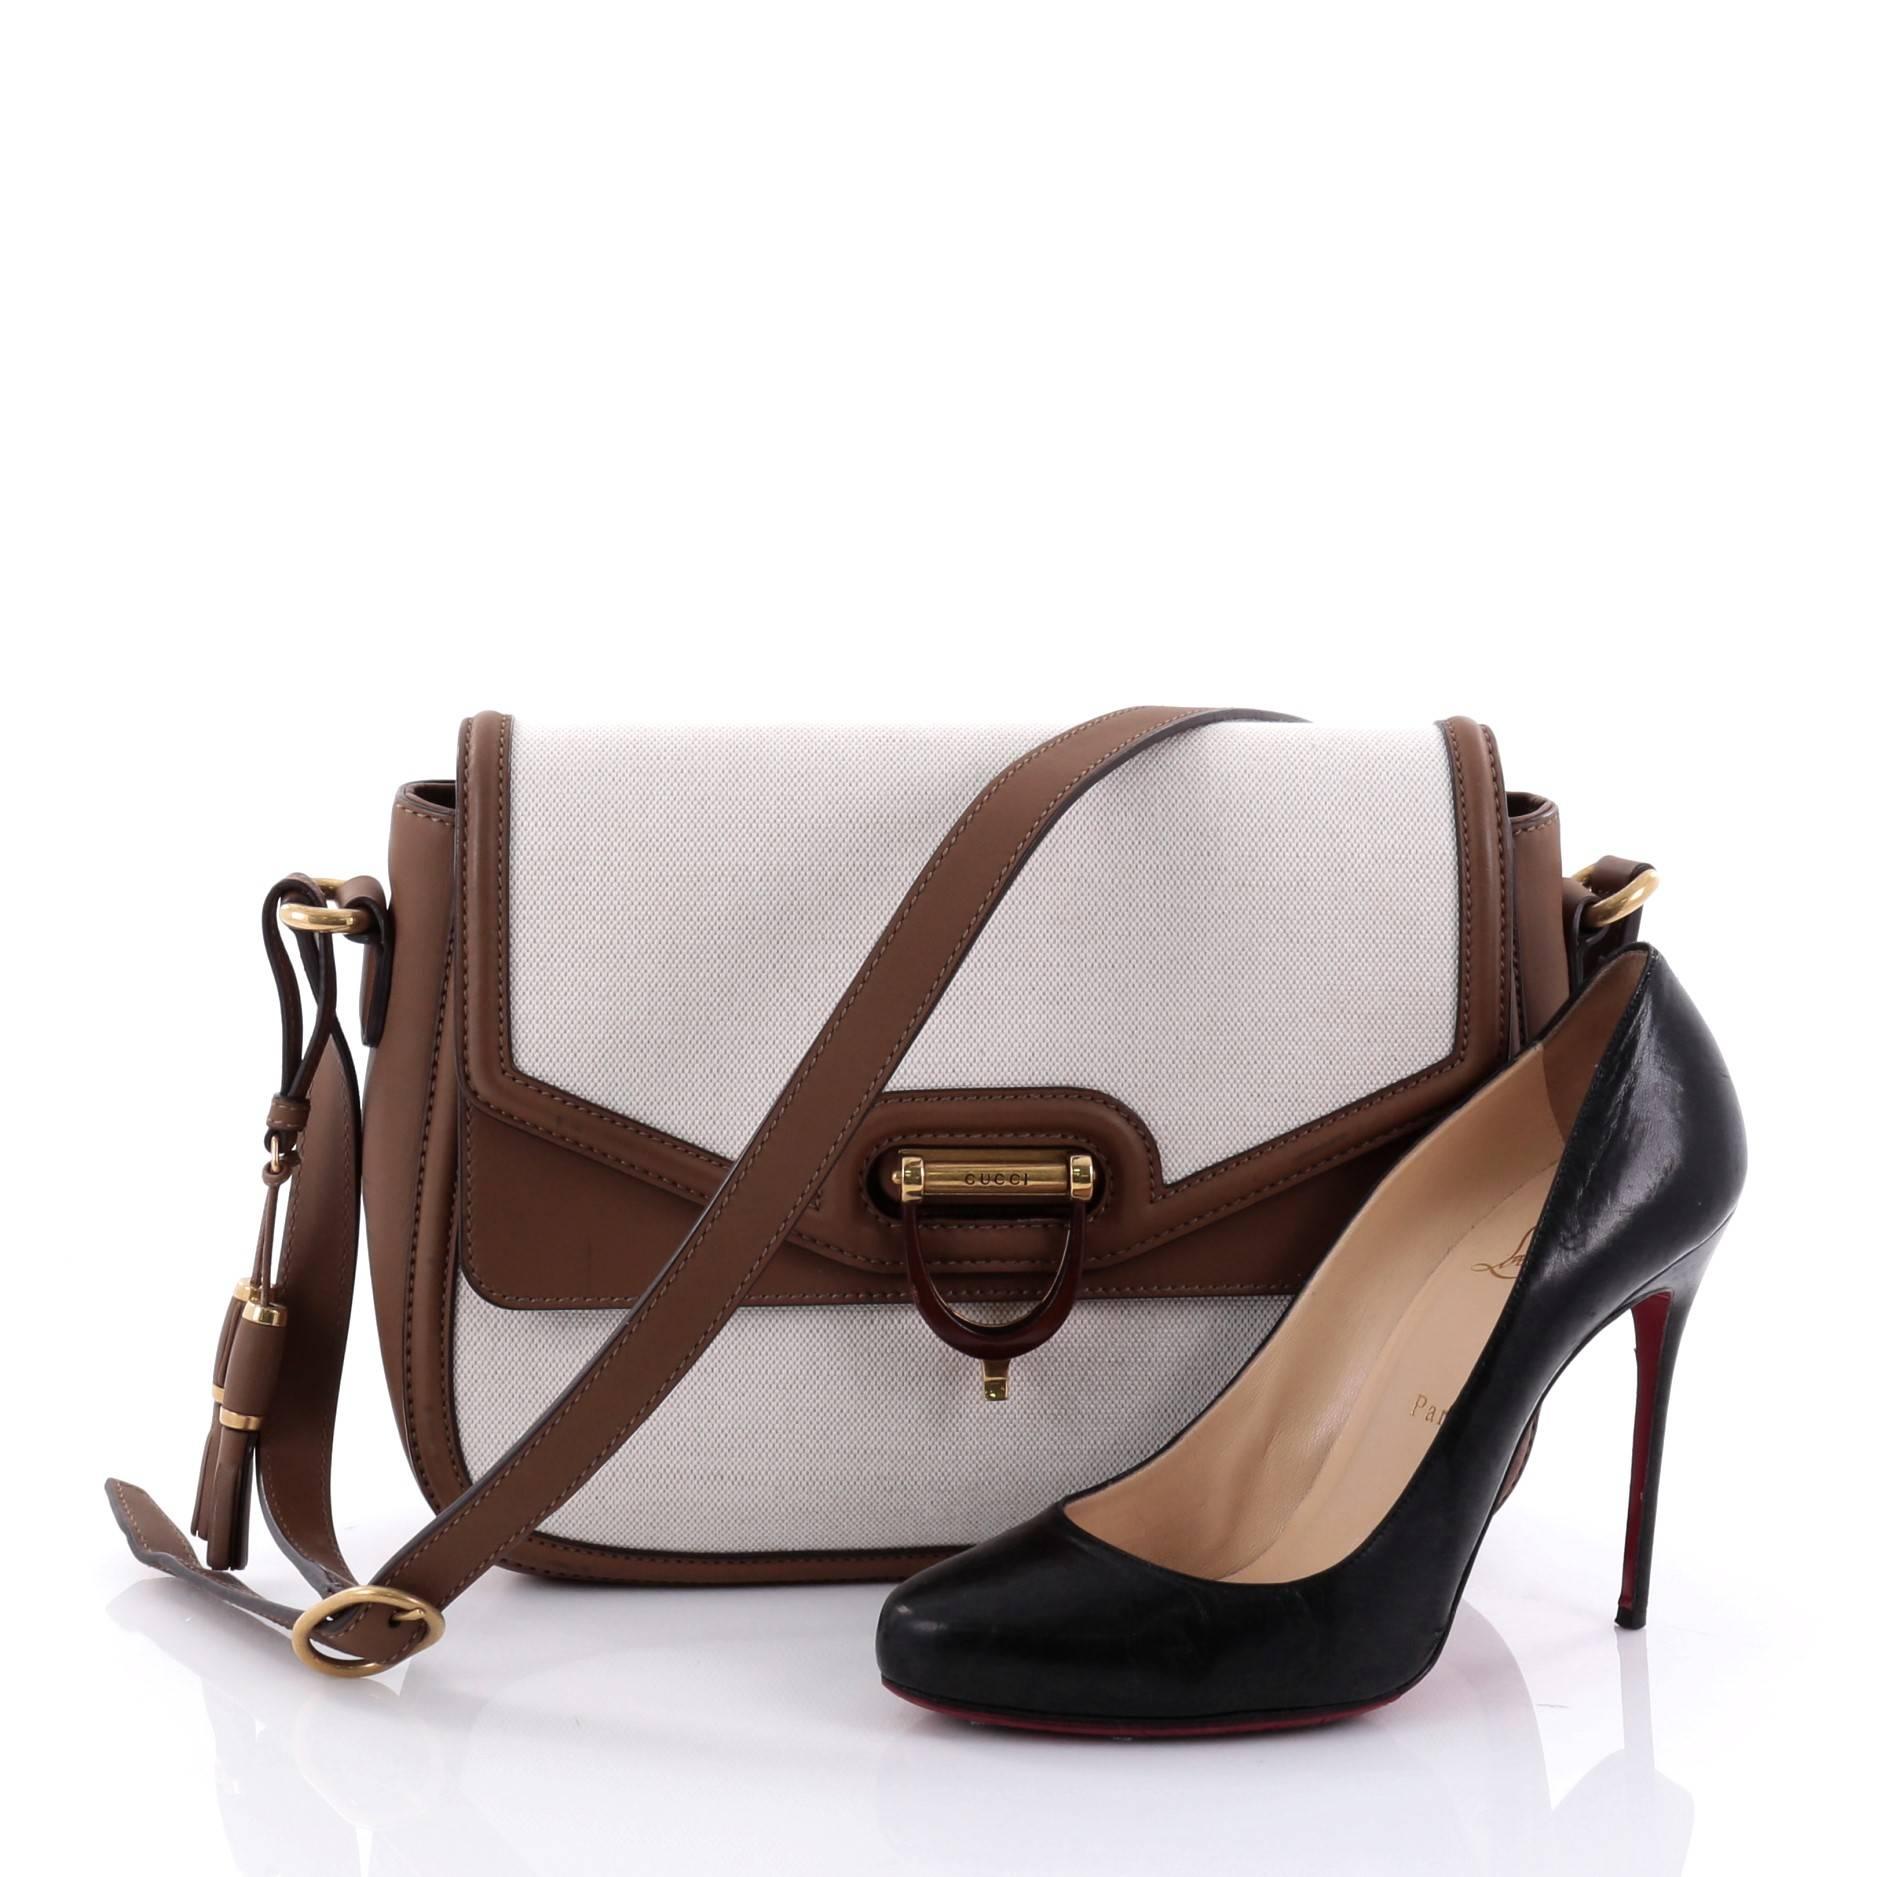 This authentic Gucci Derby Flap Shoulder Bag Canvas and Leather Medium is a stylish and chic bag perfect for your everyday use. Crafted in off-white canvas with brown leather trims, this bag features an adjustable strap, tassel detailing, front flap